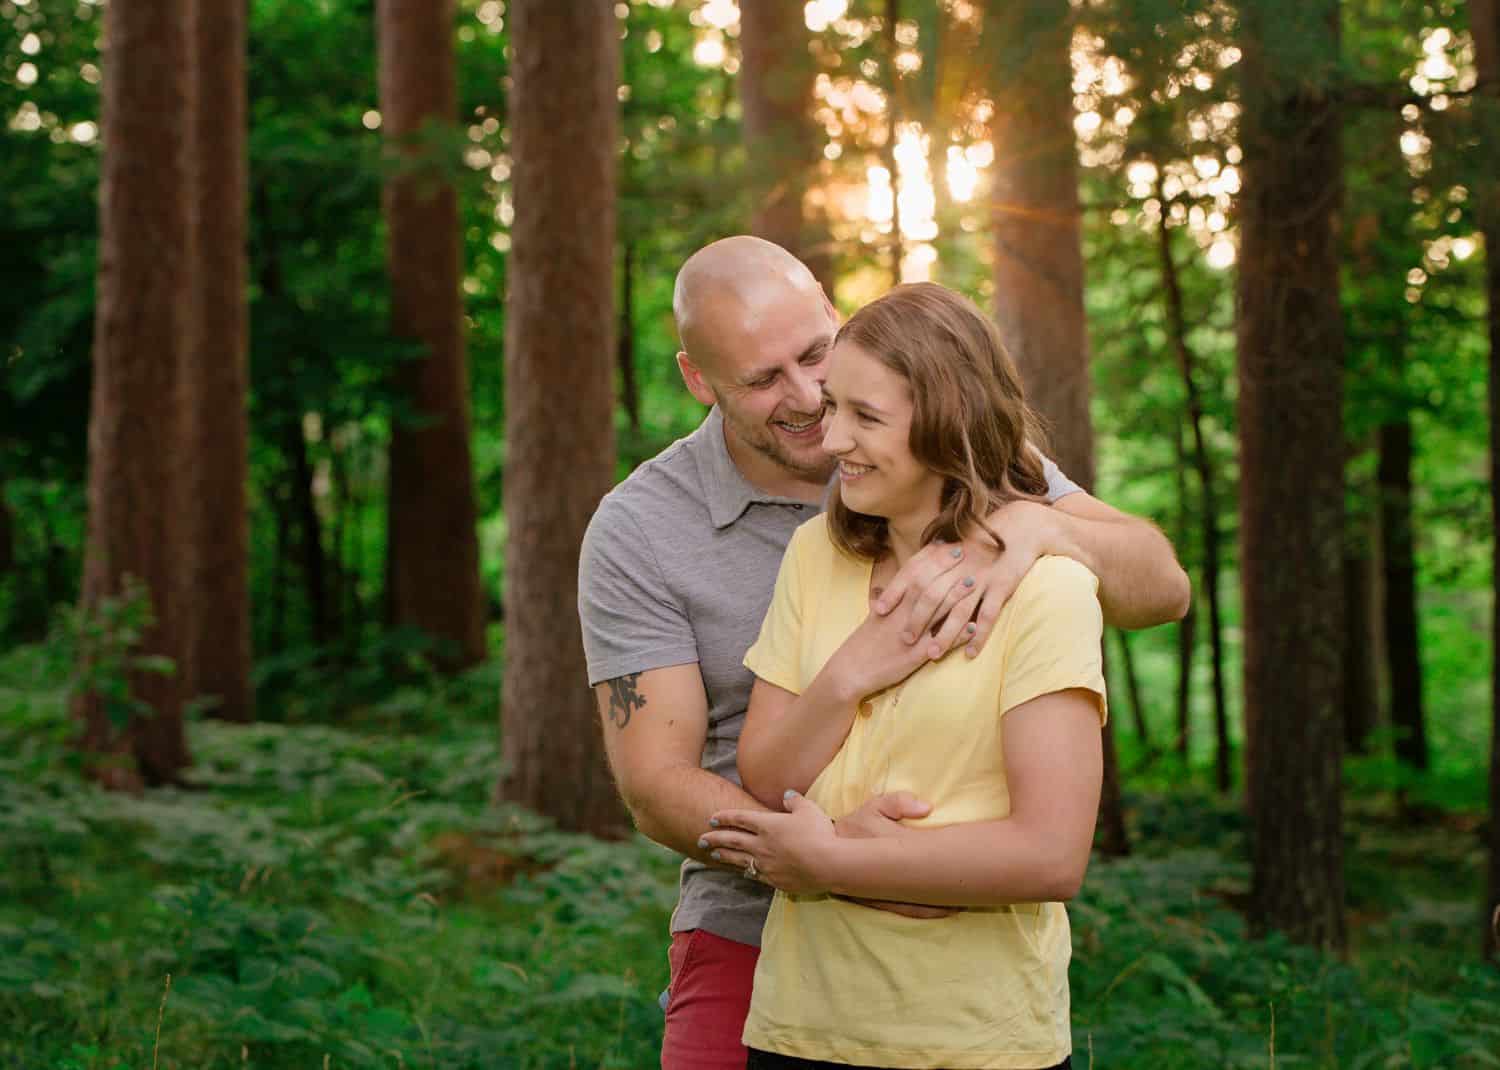 Not into dim, moody photos? Learn how a bit of fill flash outdoors can banish gloomy skies and deliver gorgeous, glowing portraits.